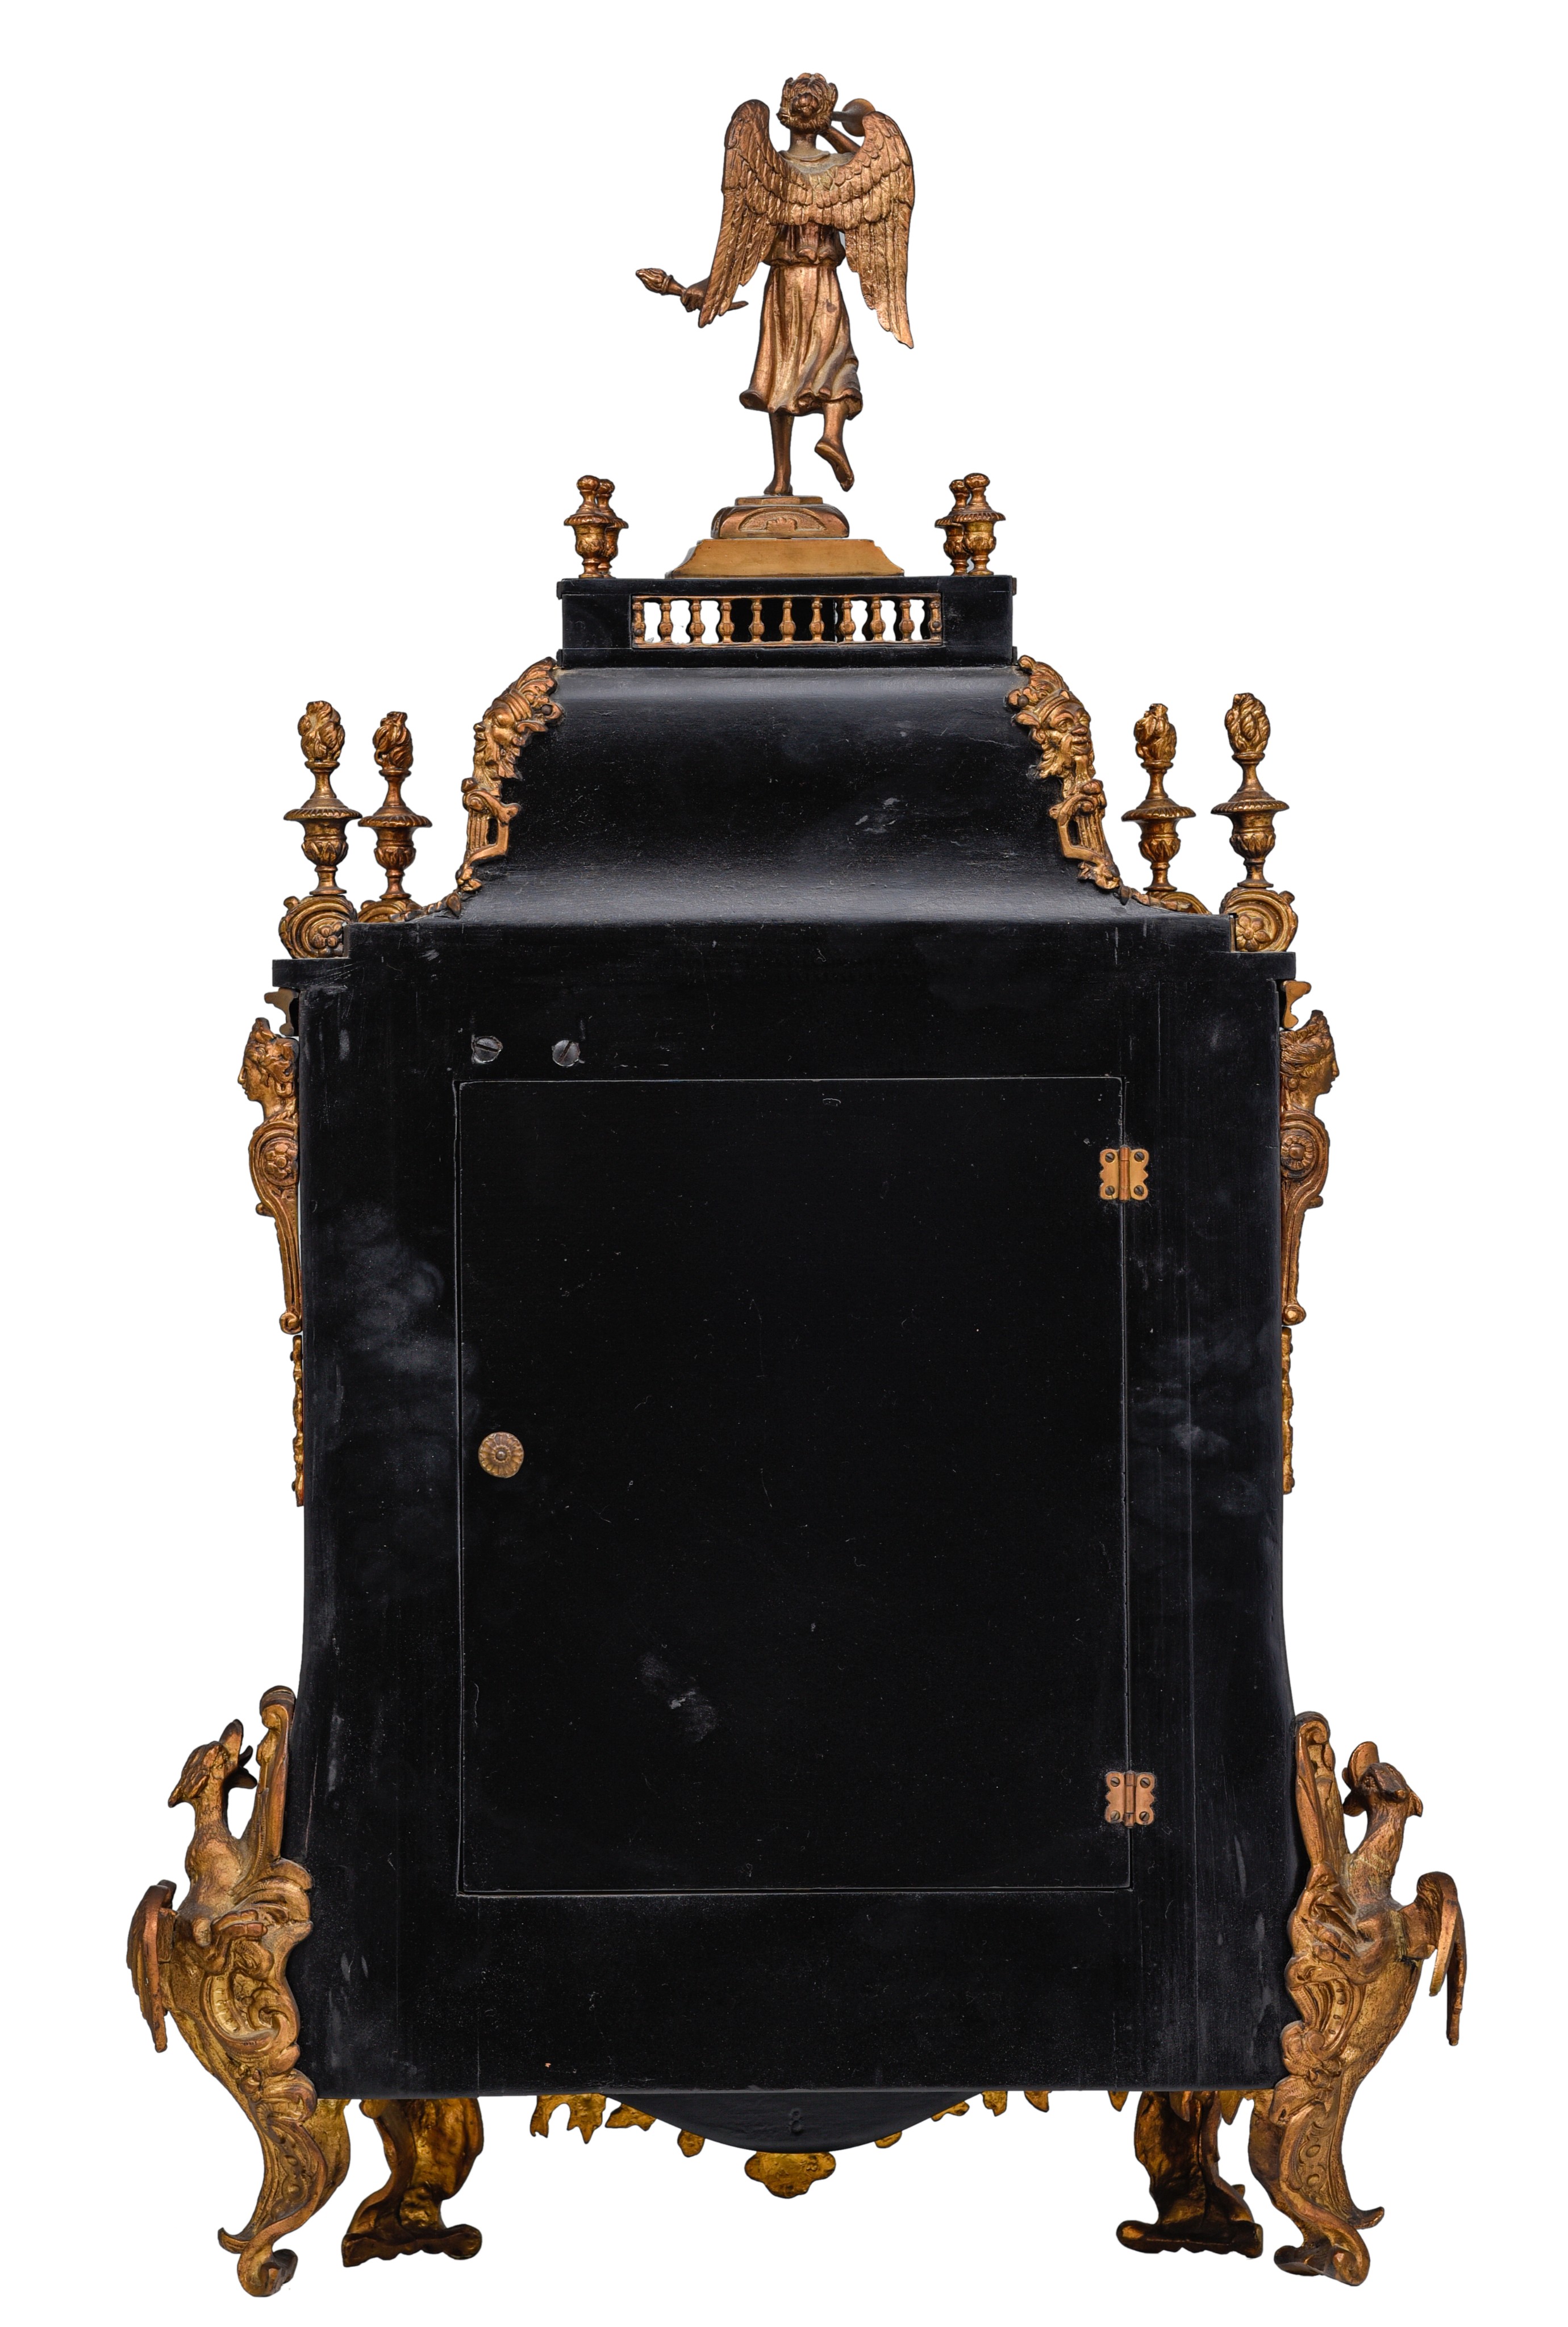 An imposing Baroque style Boulle cartel clock on stand, with gilt bronze mounts, H 184 cm - Image 4 of 15